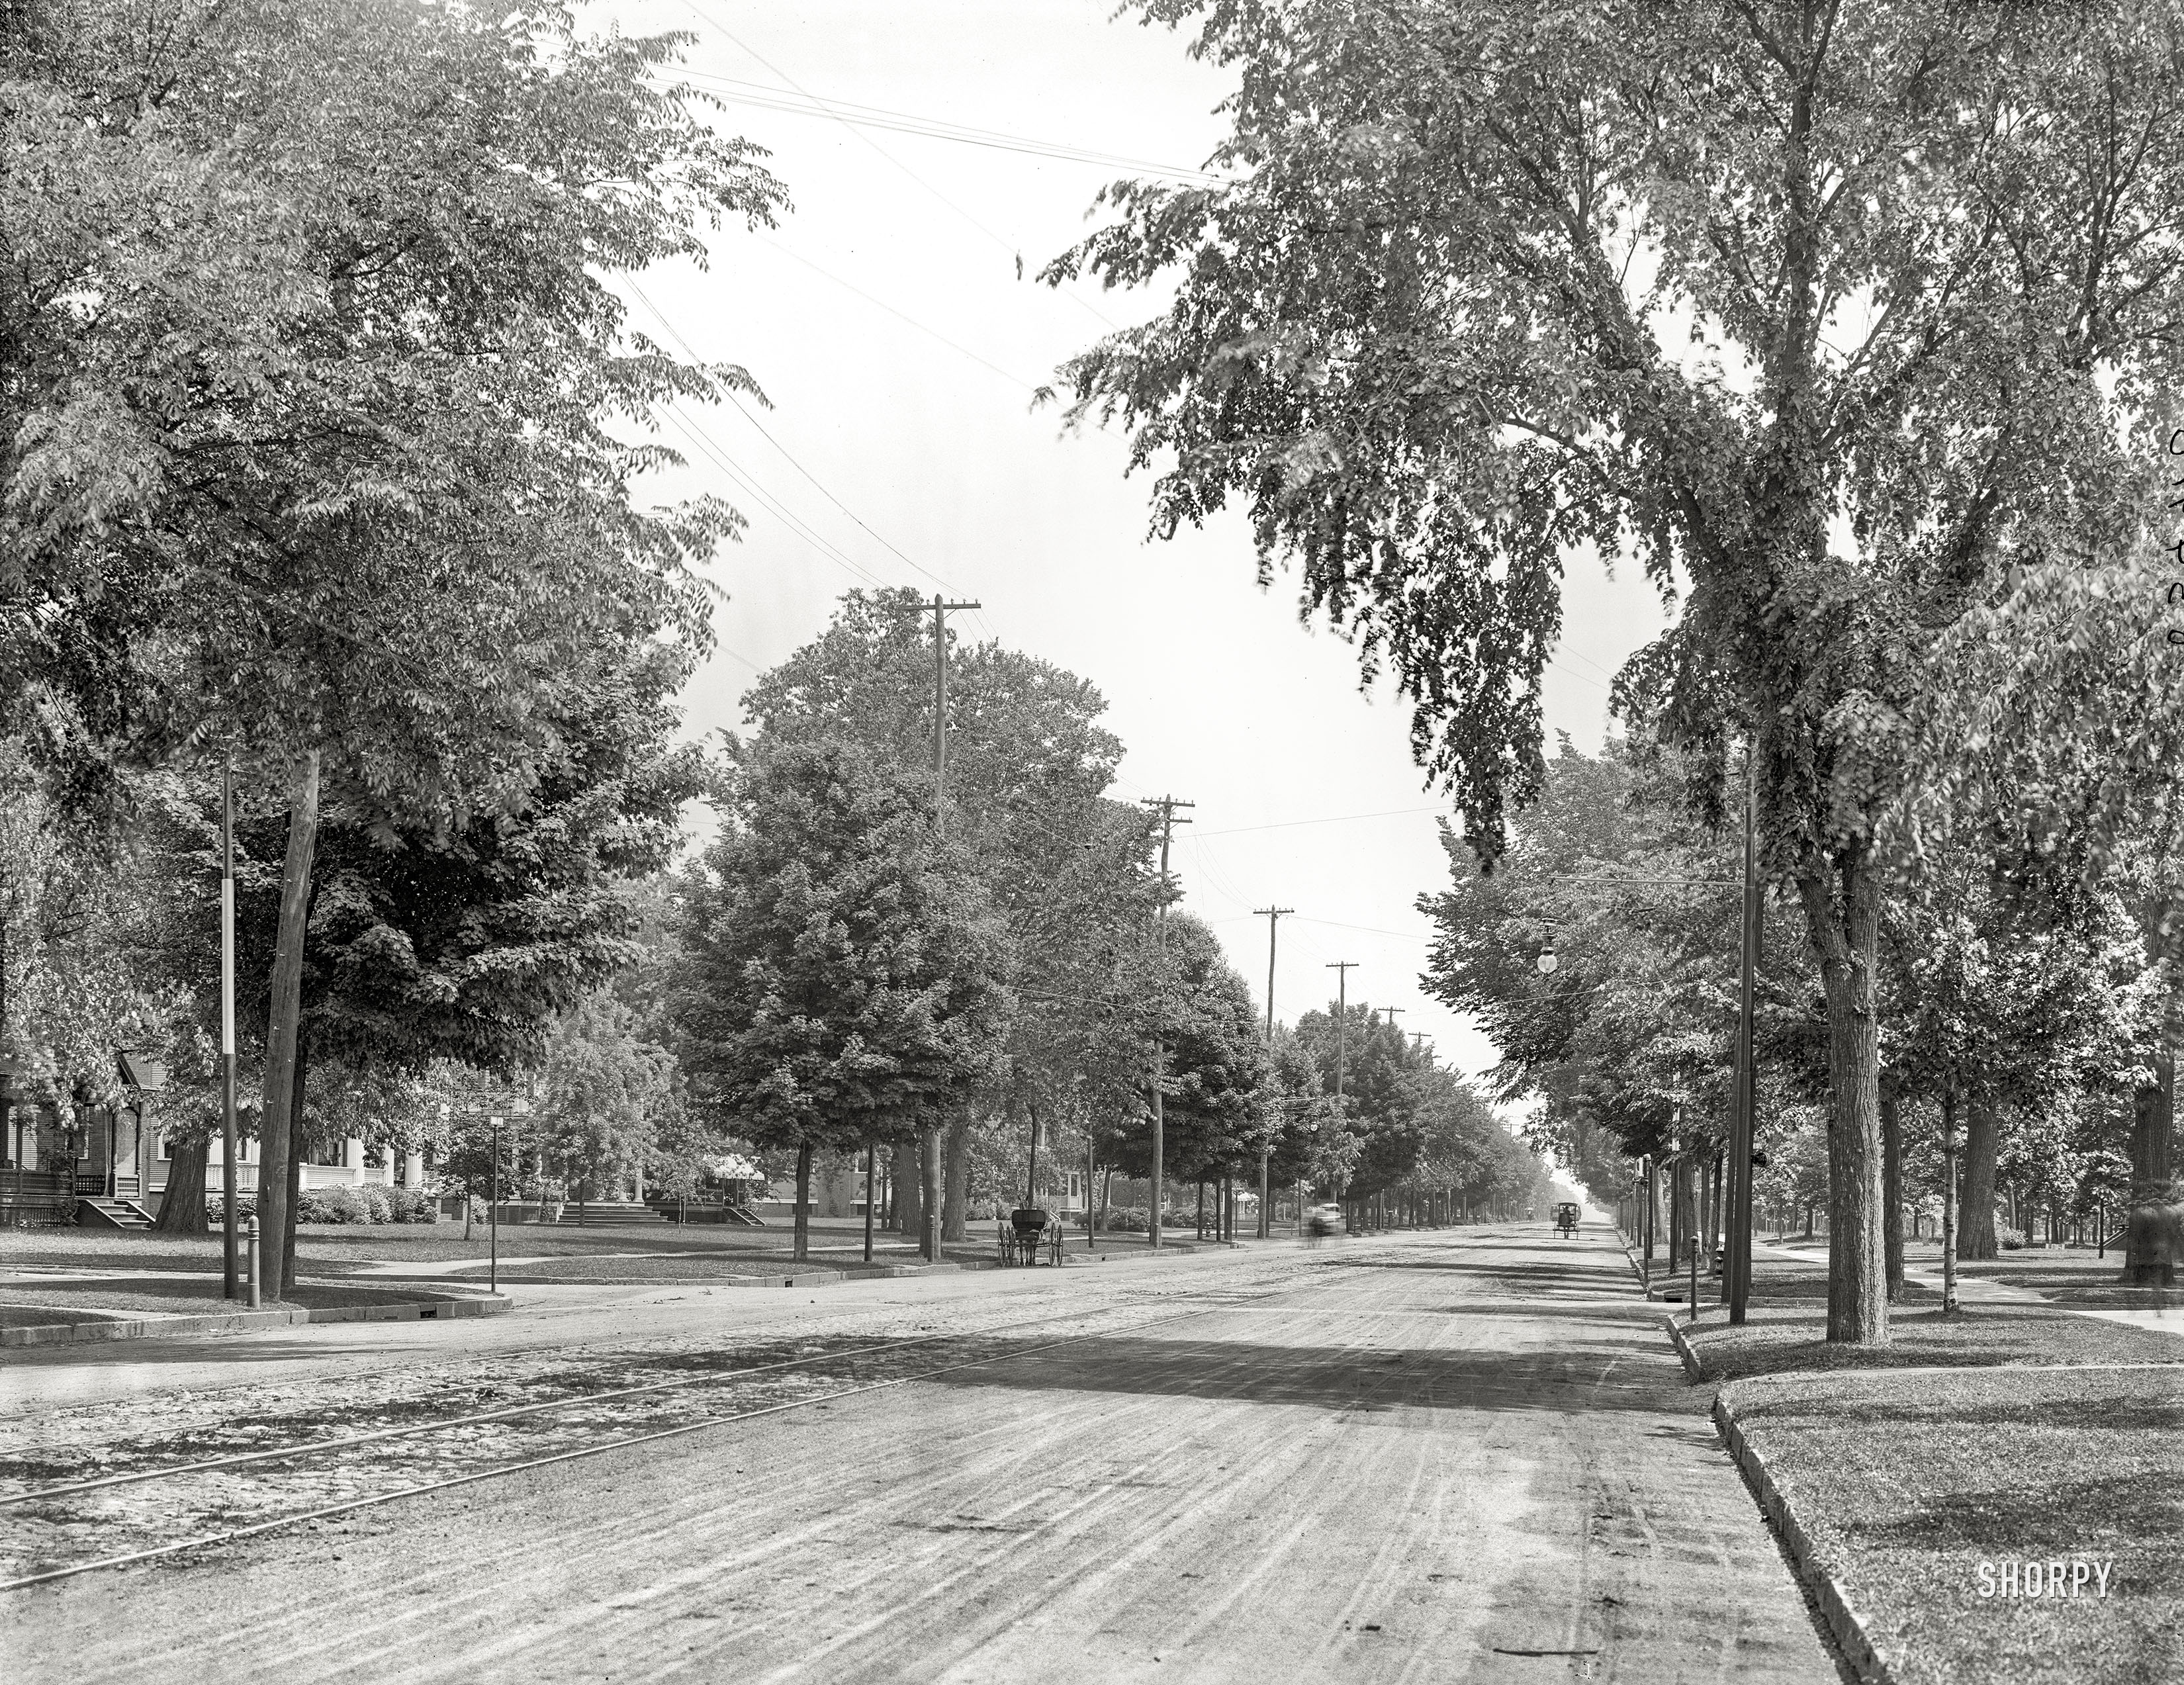 Springfield, Mass., circa 1905. "Sumner Avenue looking east." 8x10 inch dry plate glass negative, Detroit Publishing Company. View full size.